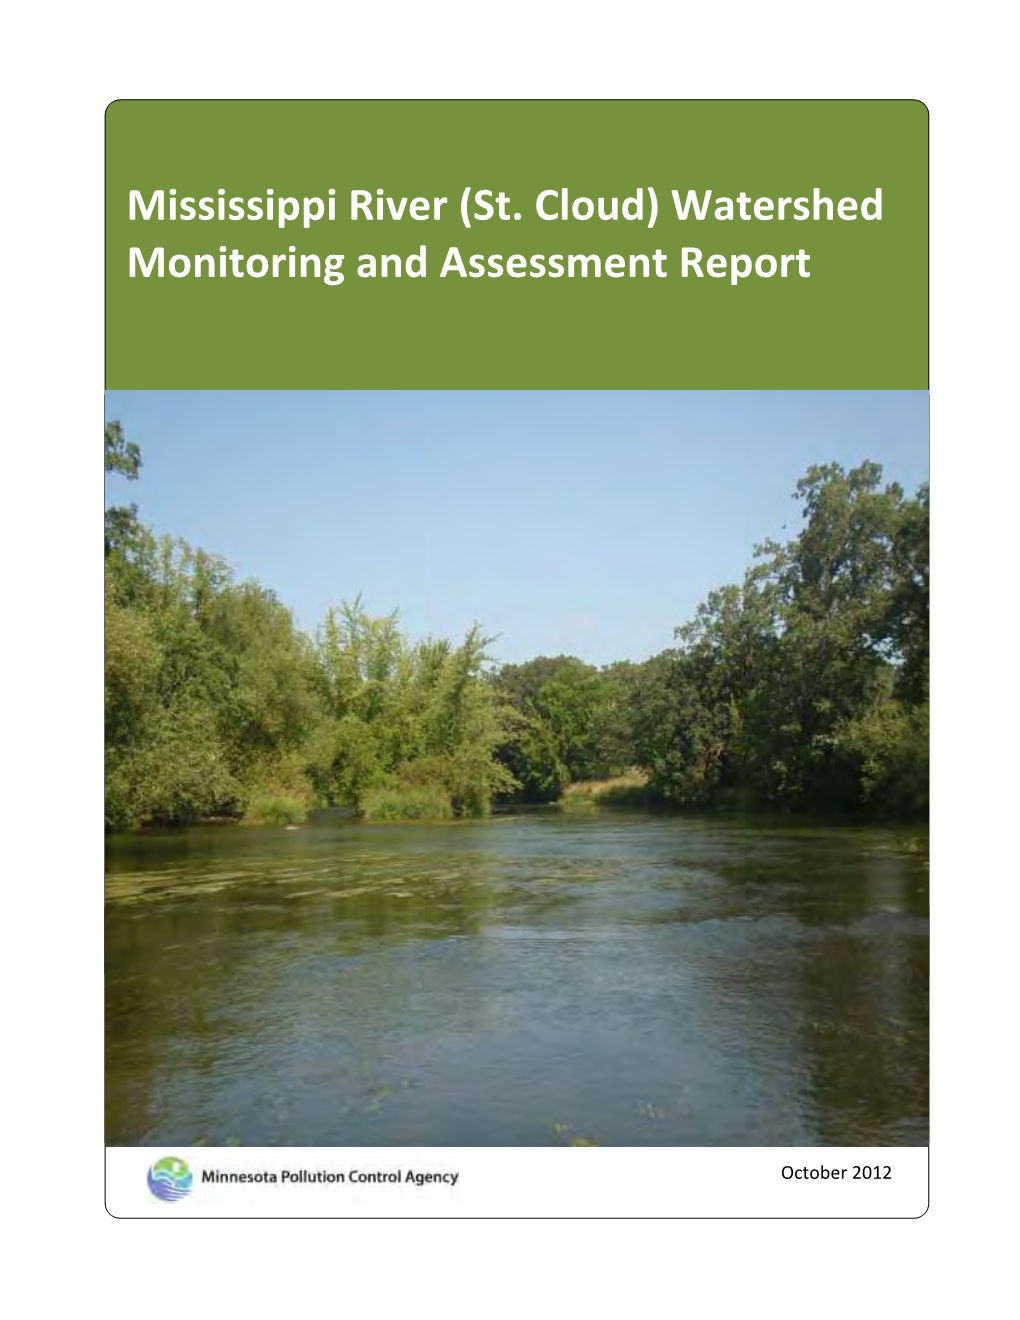 Mississippi River – St. Cloud Watershed Monitoring And